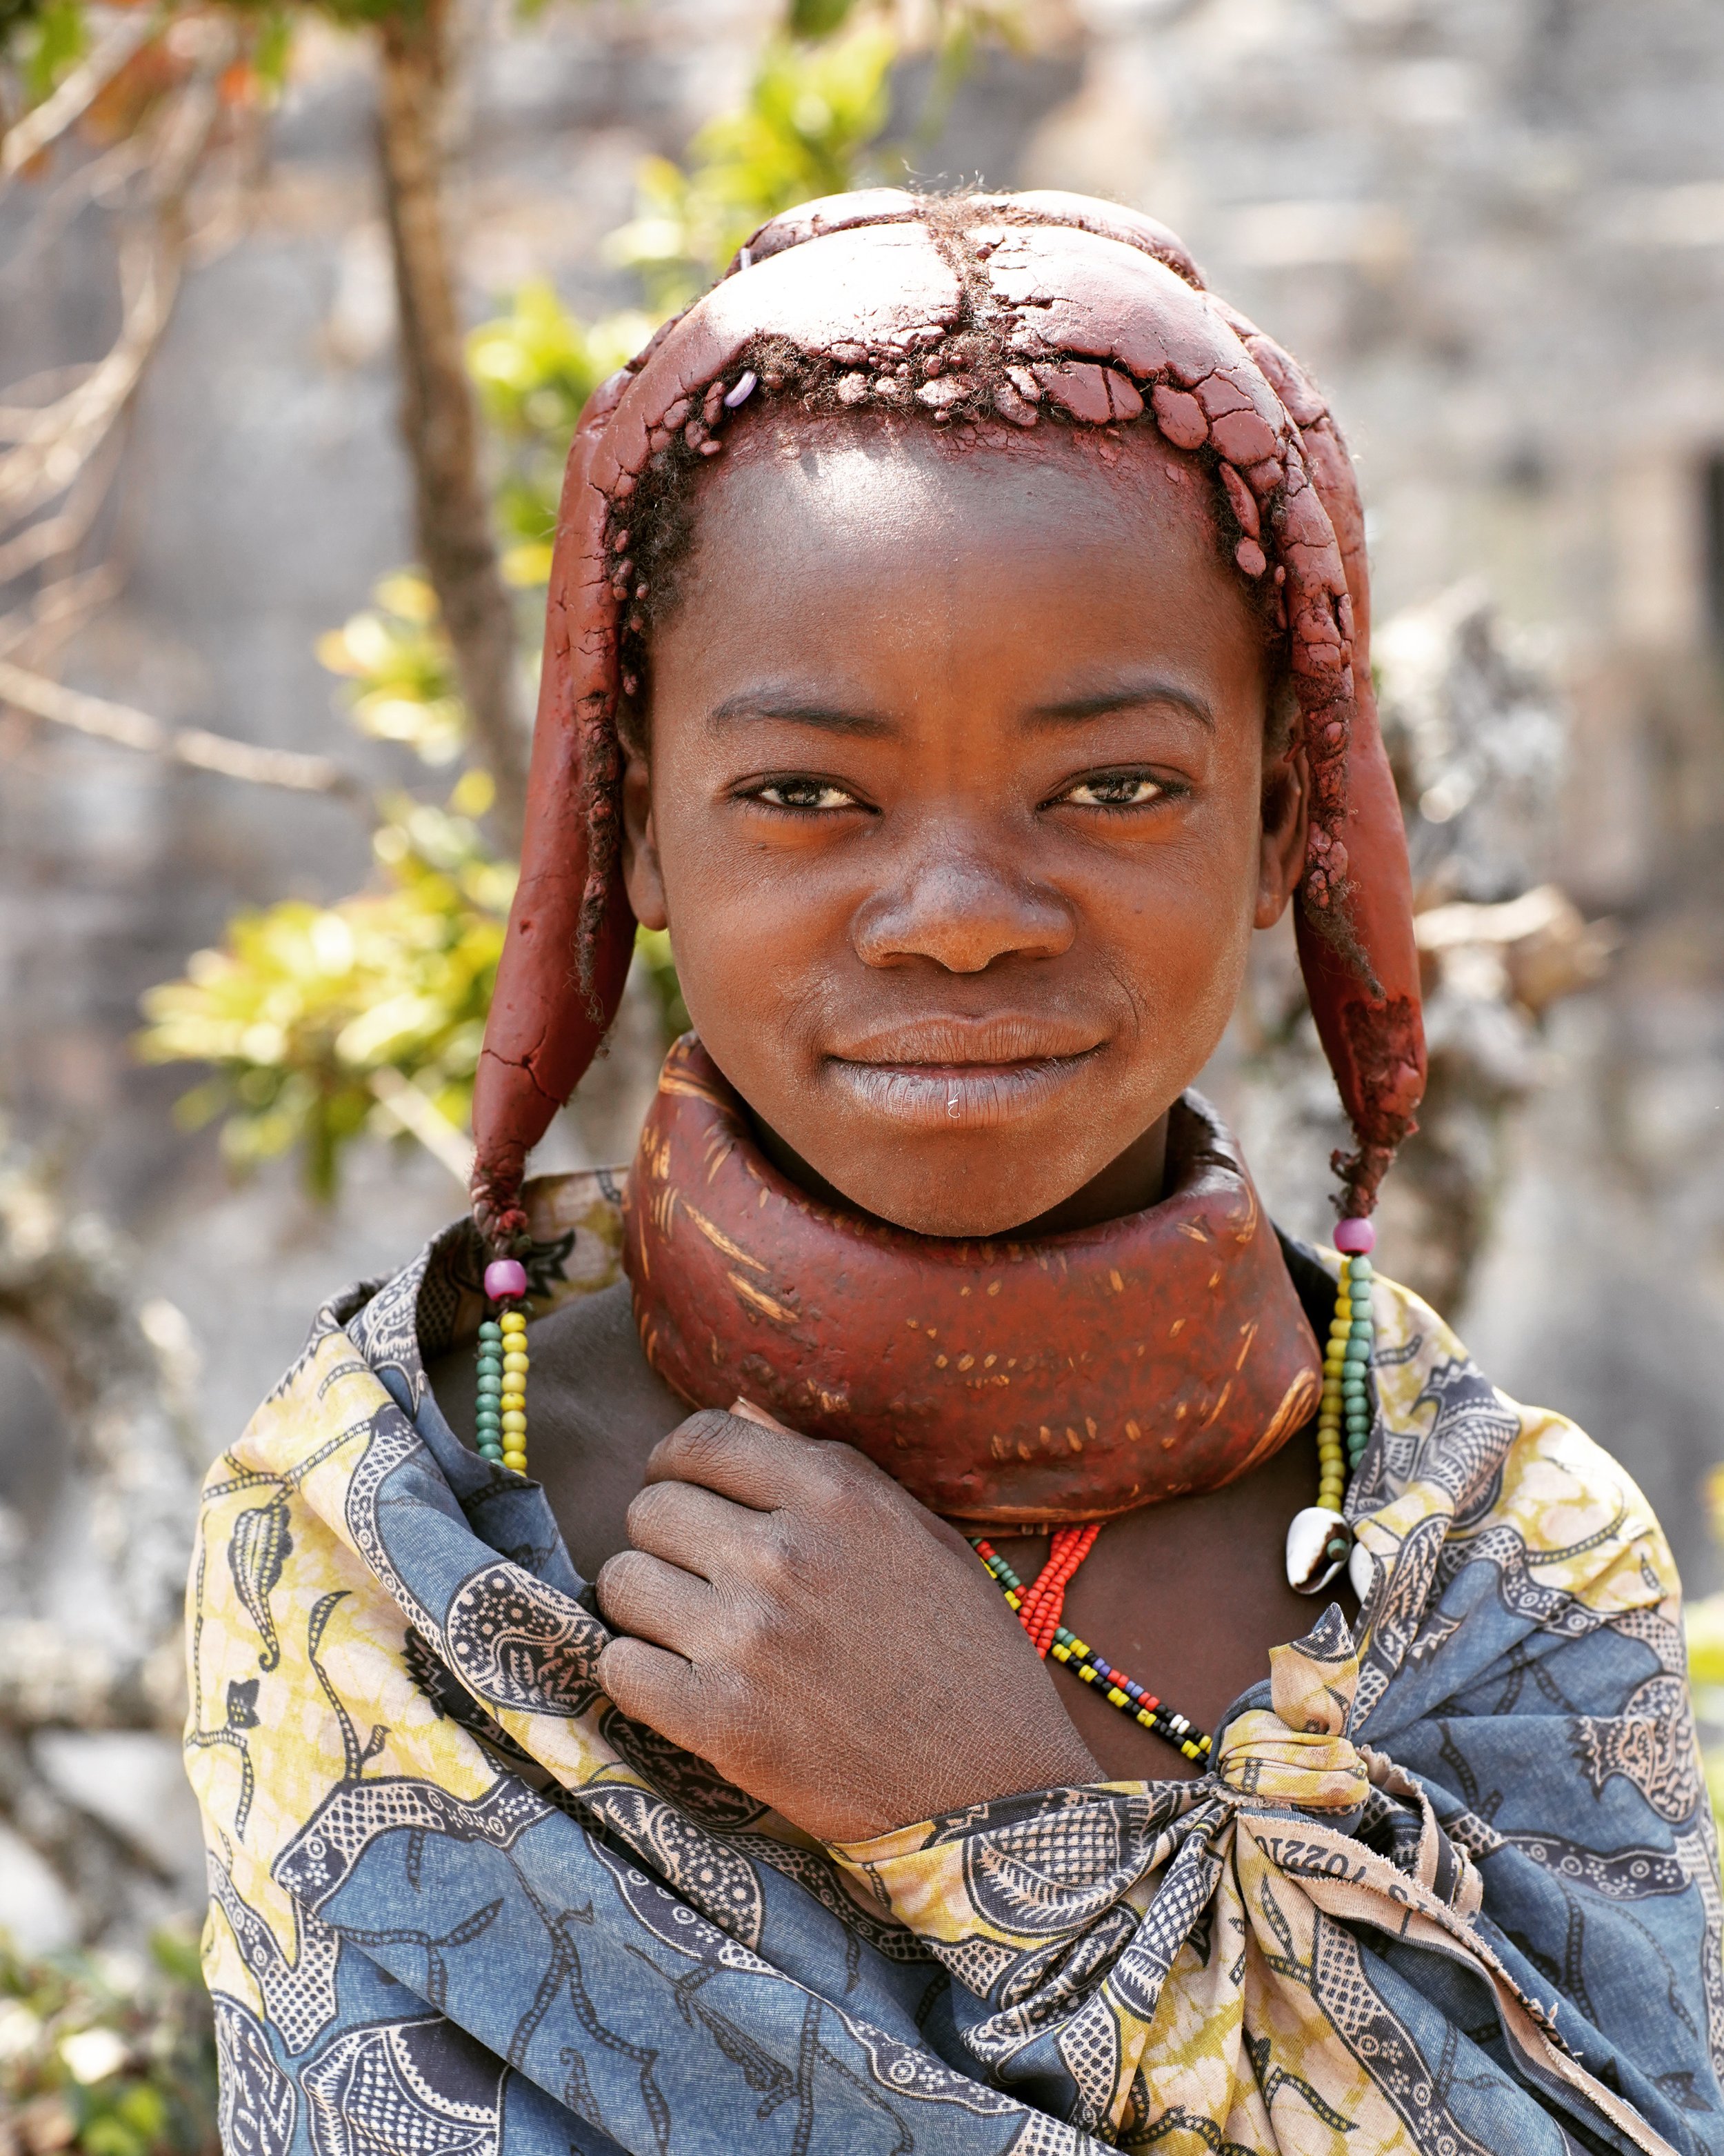 Mwila girl with traditional hairstyle in Angola 